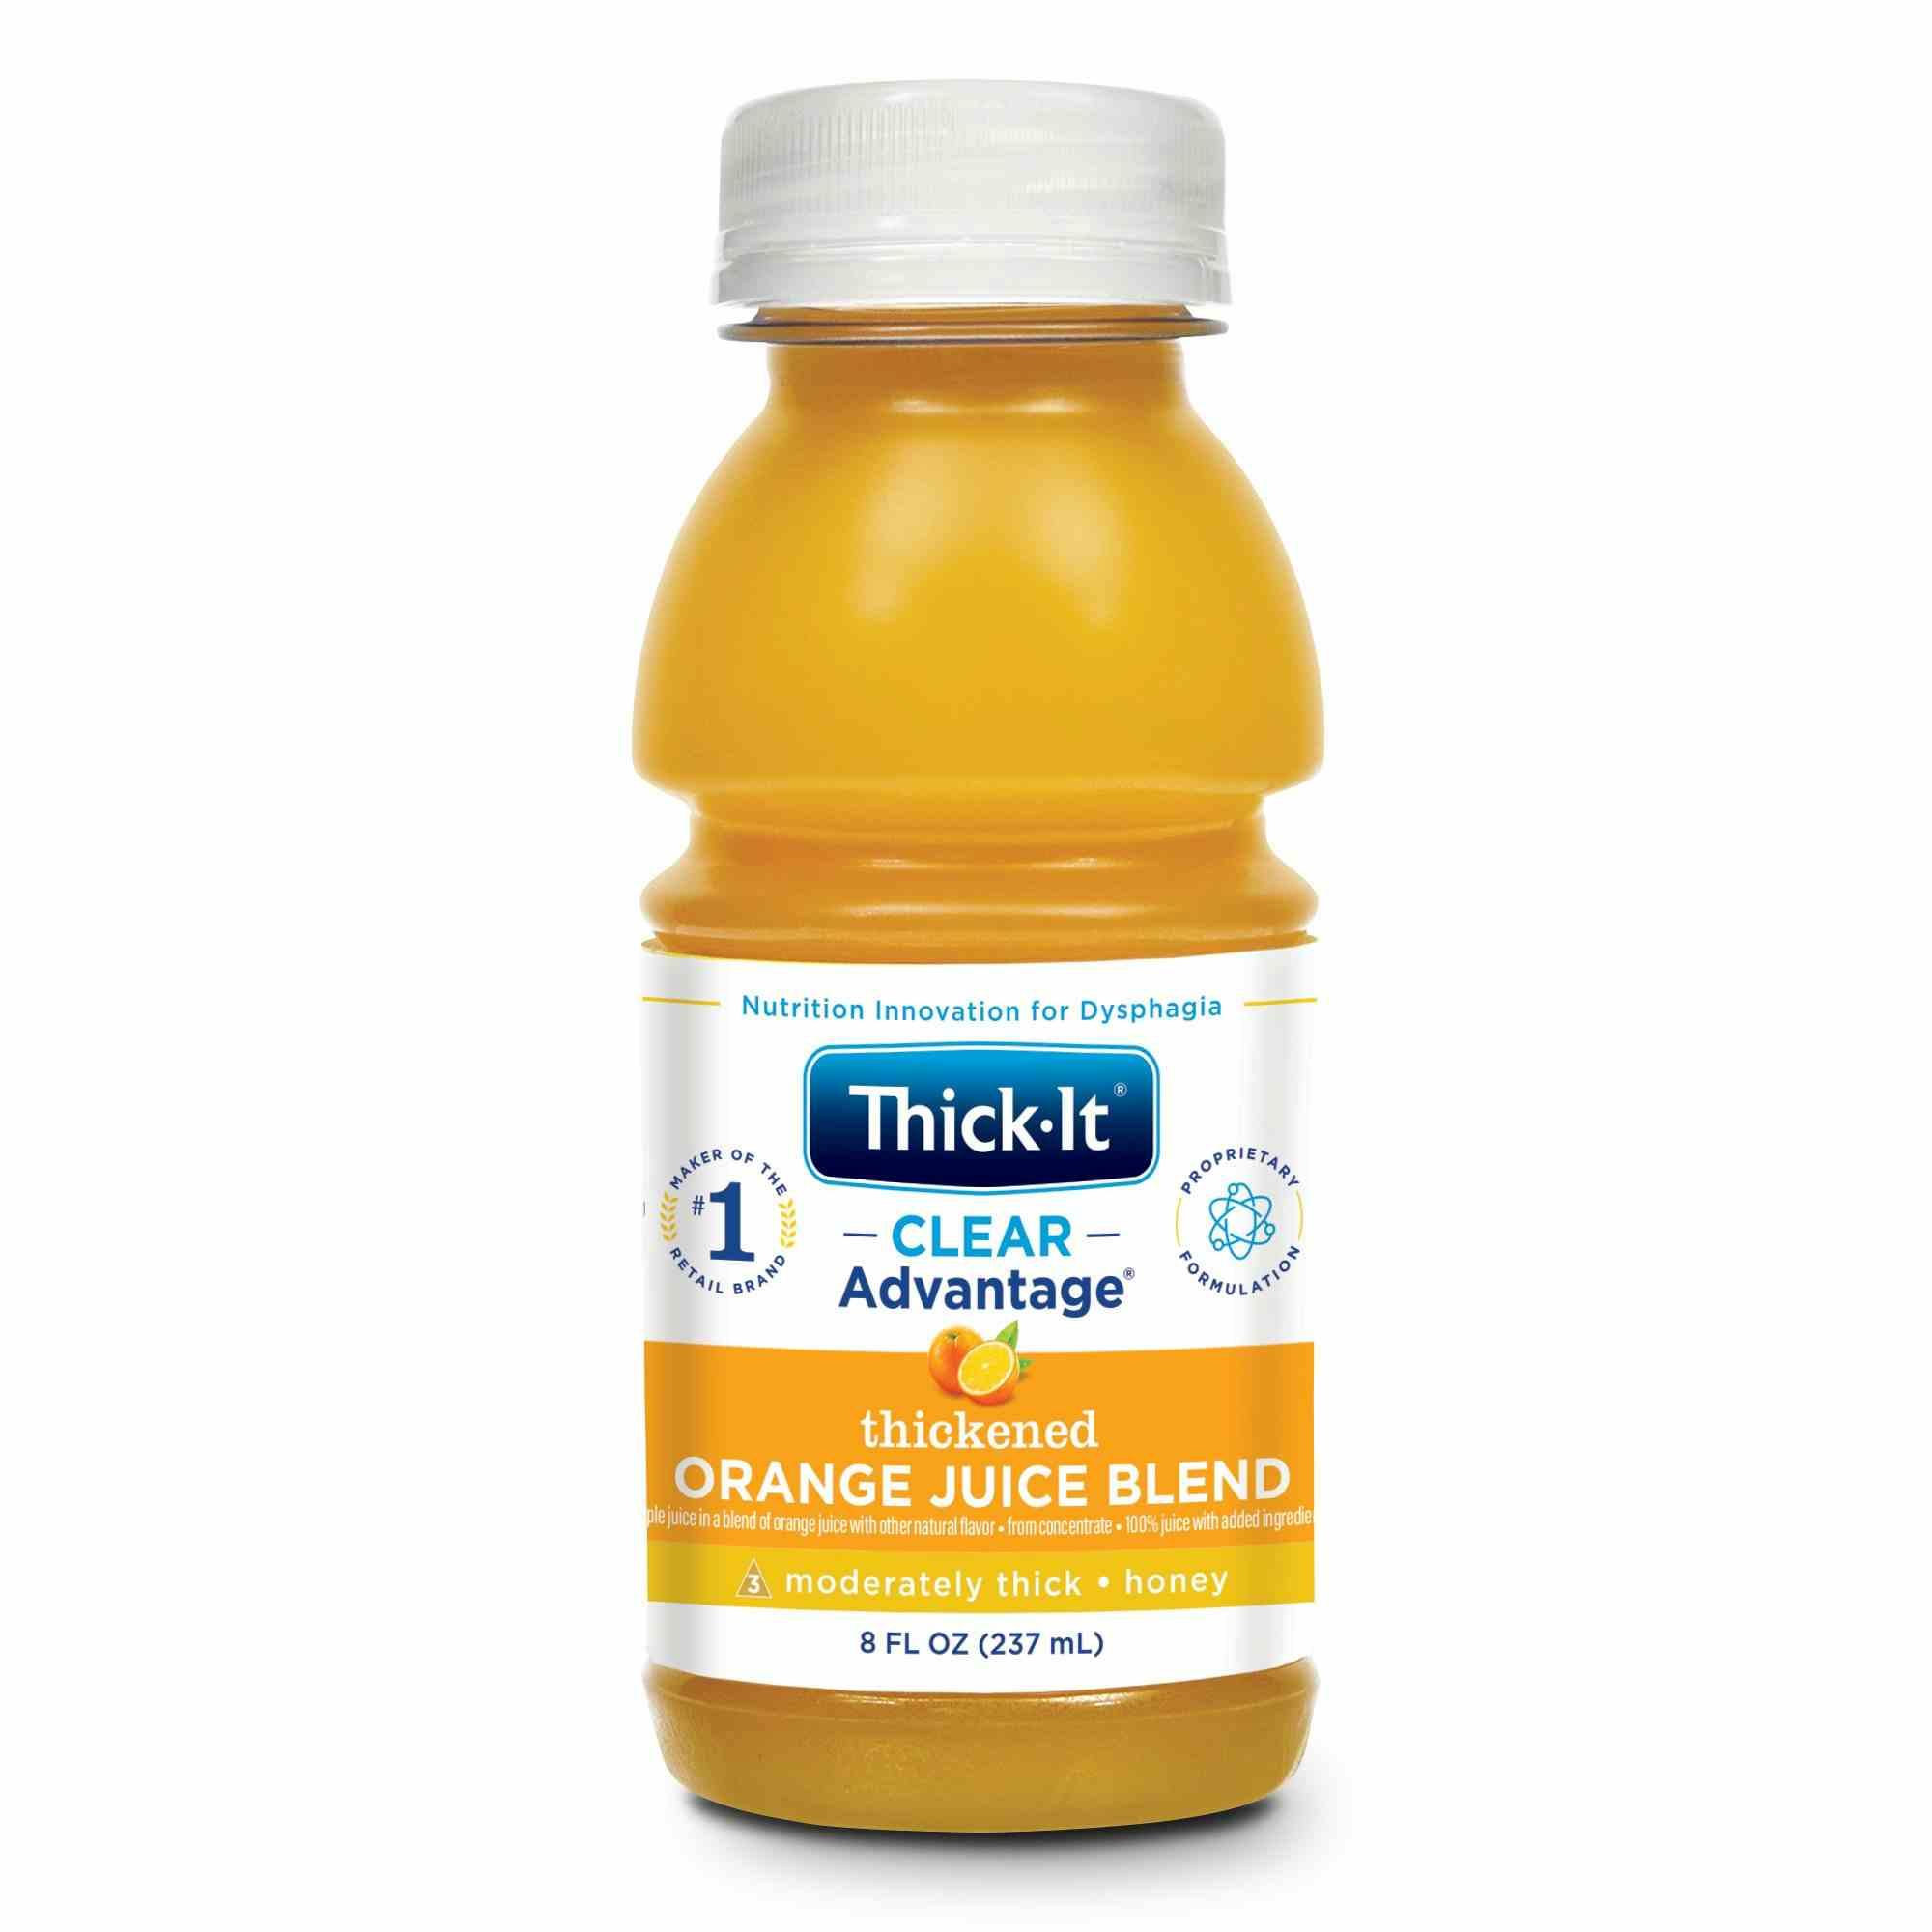 Thick-It Clear Advantage Thickened Orange Juice Blend, Moderately Thick, Honey Consistency, B478-L9044, 8 oz. - 1 Each